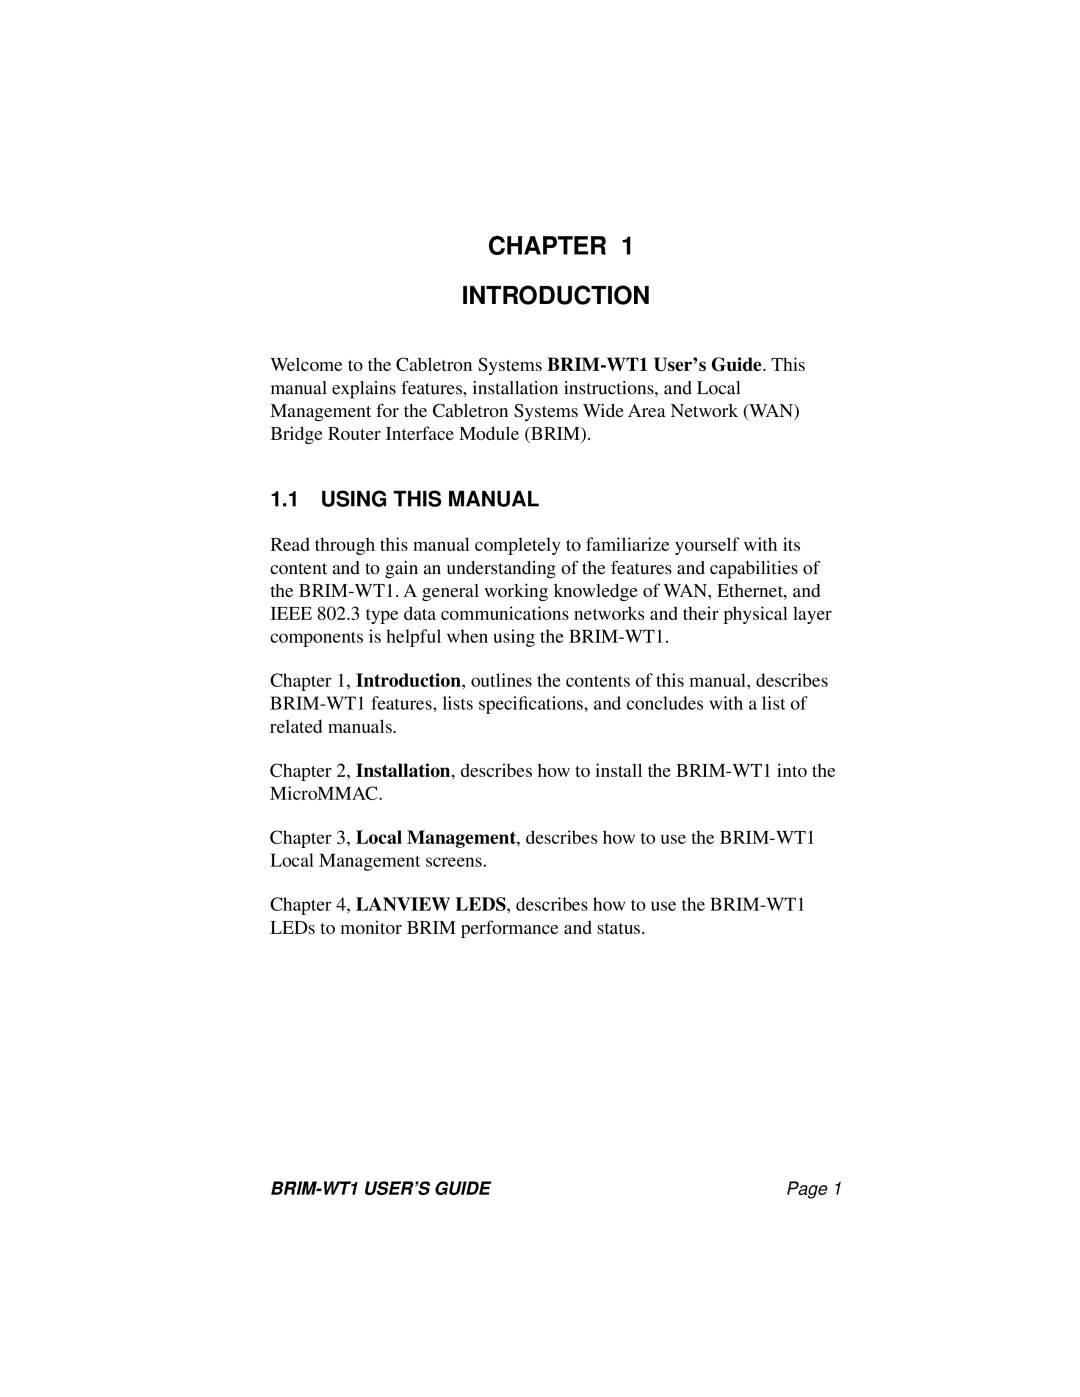 Cabletron Systems BRIM-WT1 manual Chapter Introduction, Using This Manual 